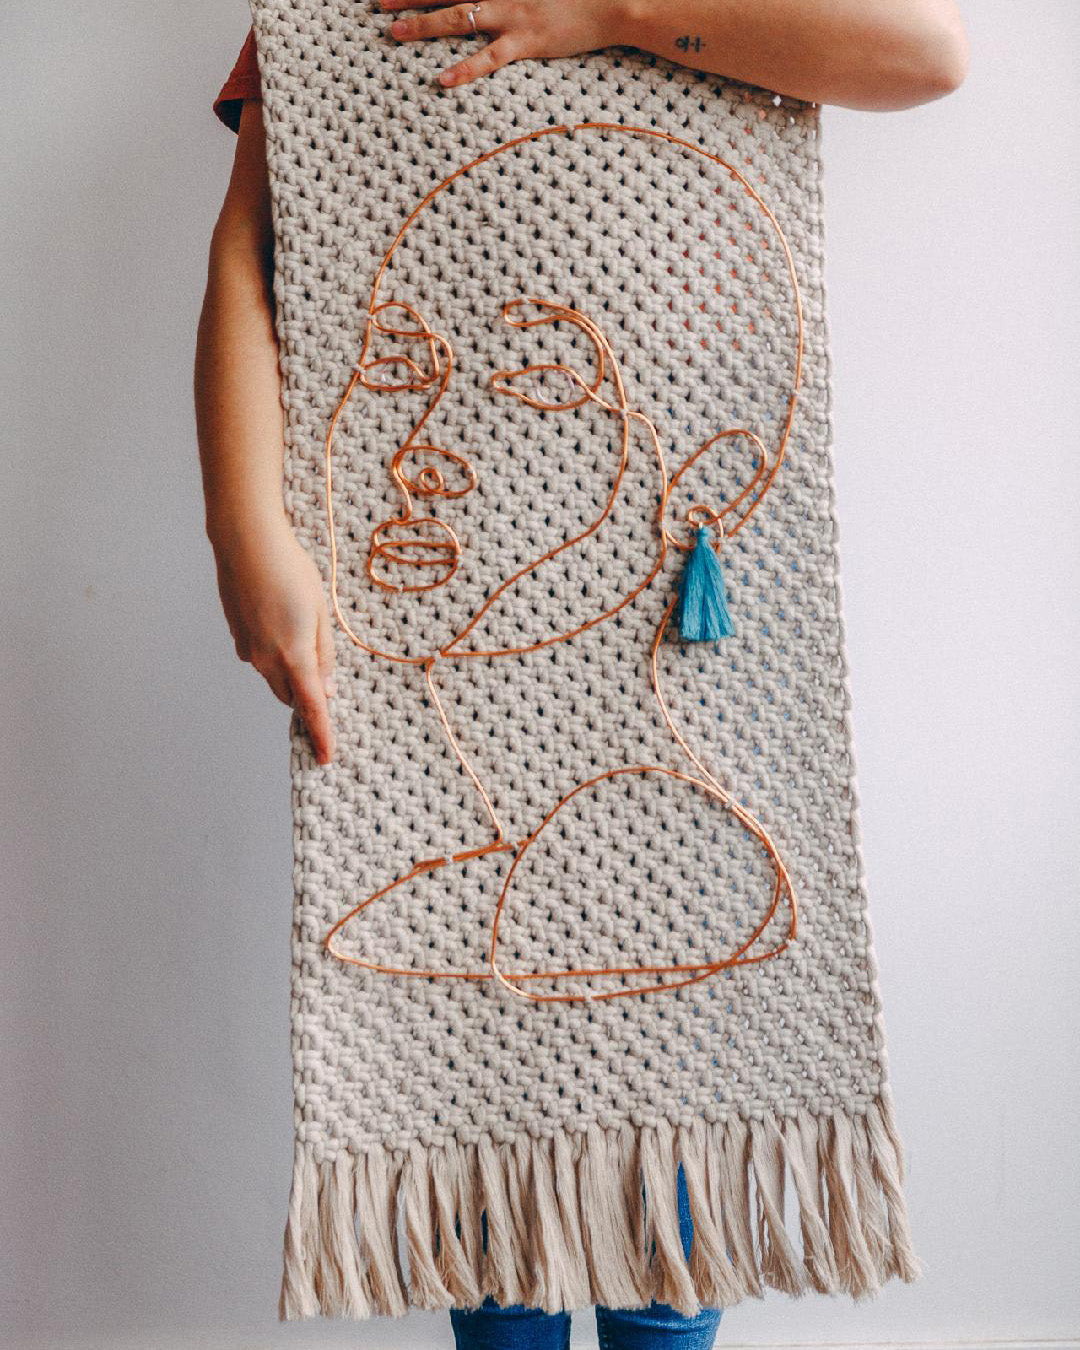 holds up a handwoven wall hanging with an abstract copper wire face and a blue tassel, symbolizing the fusion of minimalist art and tactile weaving in a display of creative expression.